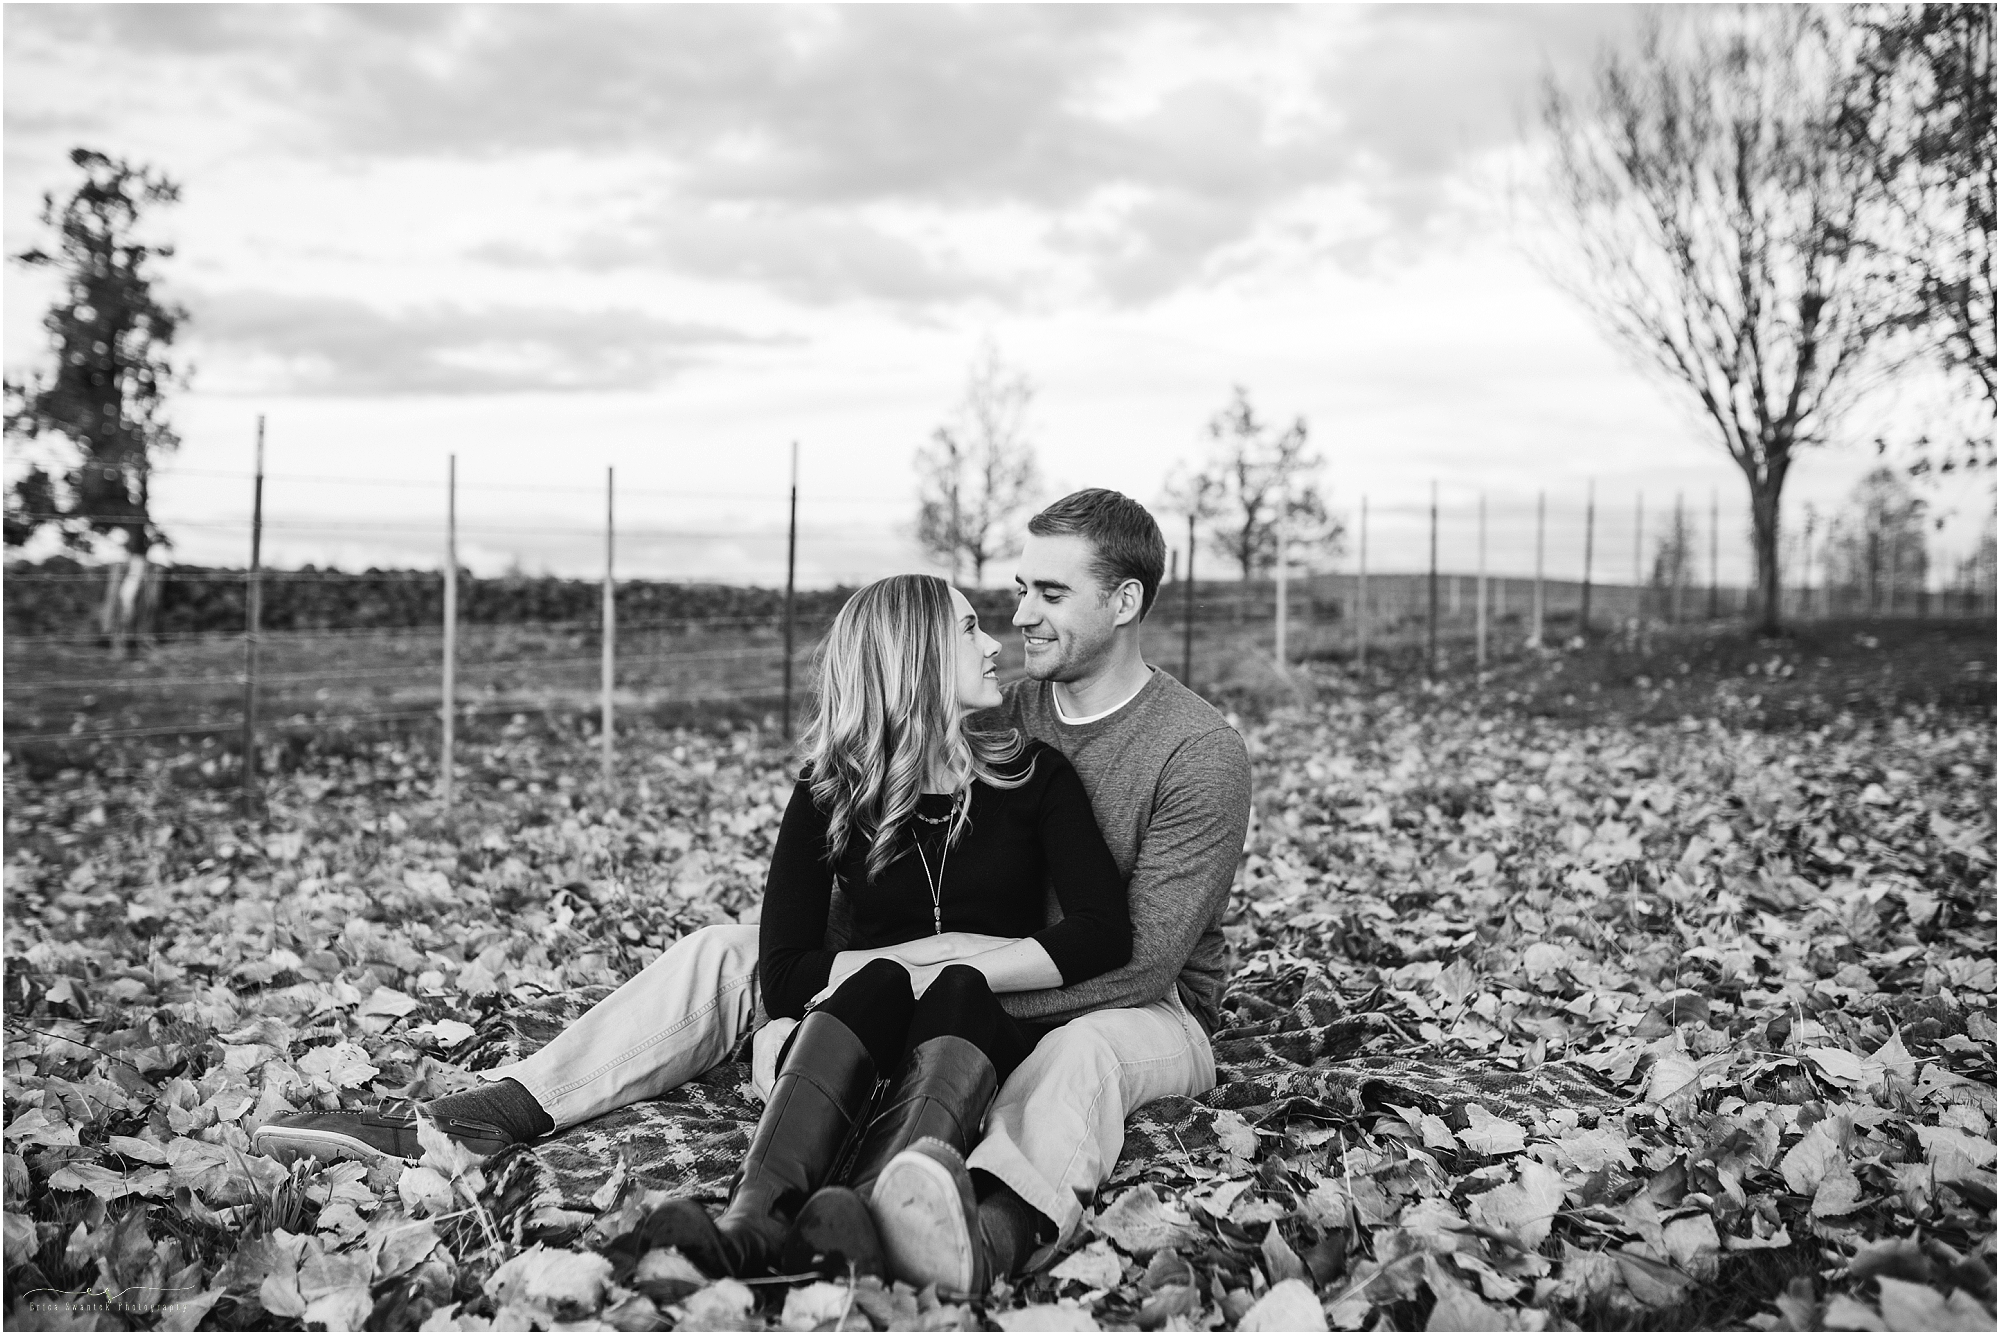 A gorgeous classic black and white photograph at this Powell Butte ranch lifestyle engagement session outside of Bend, Oregon. 